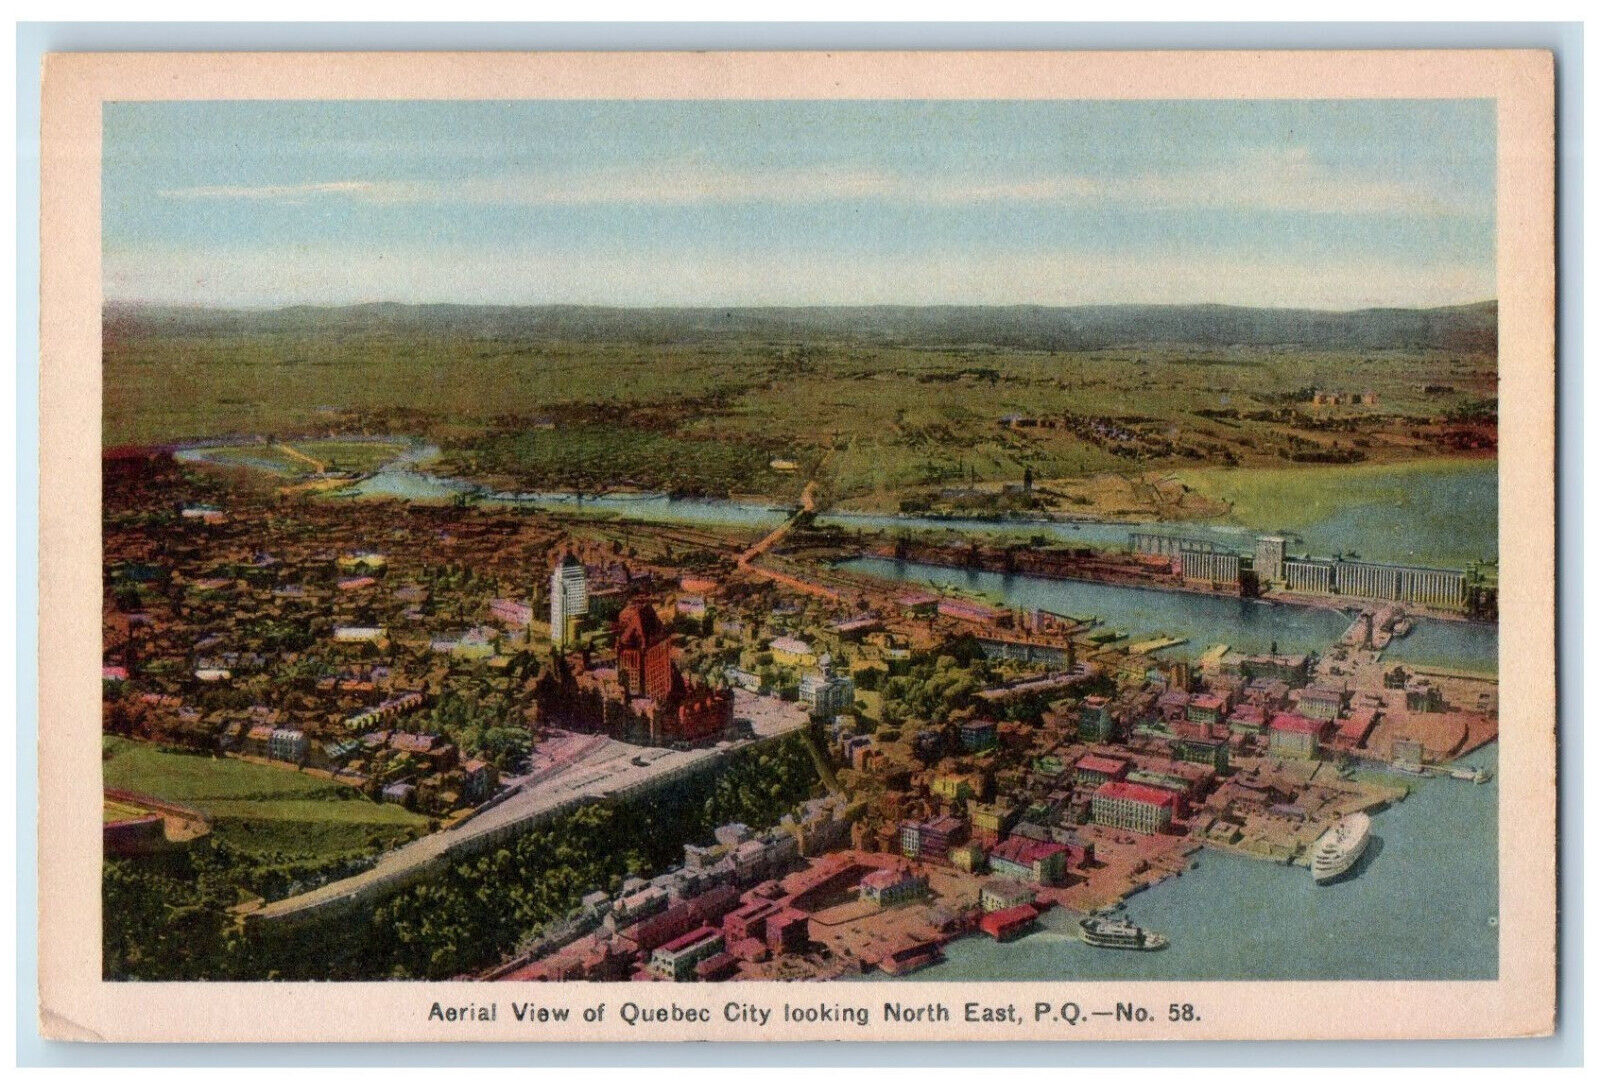 1937 Aerial View of Quebec City Looking North East PQ Canada Postcard